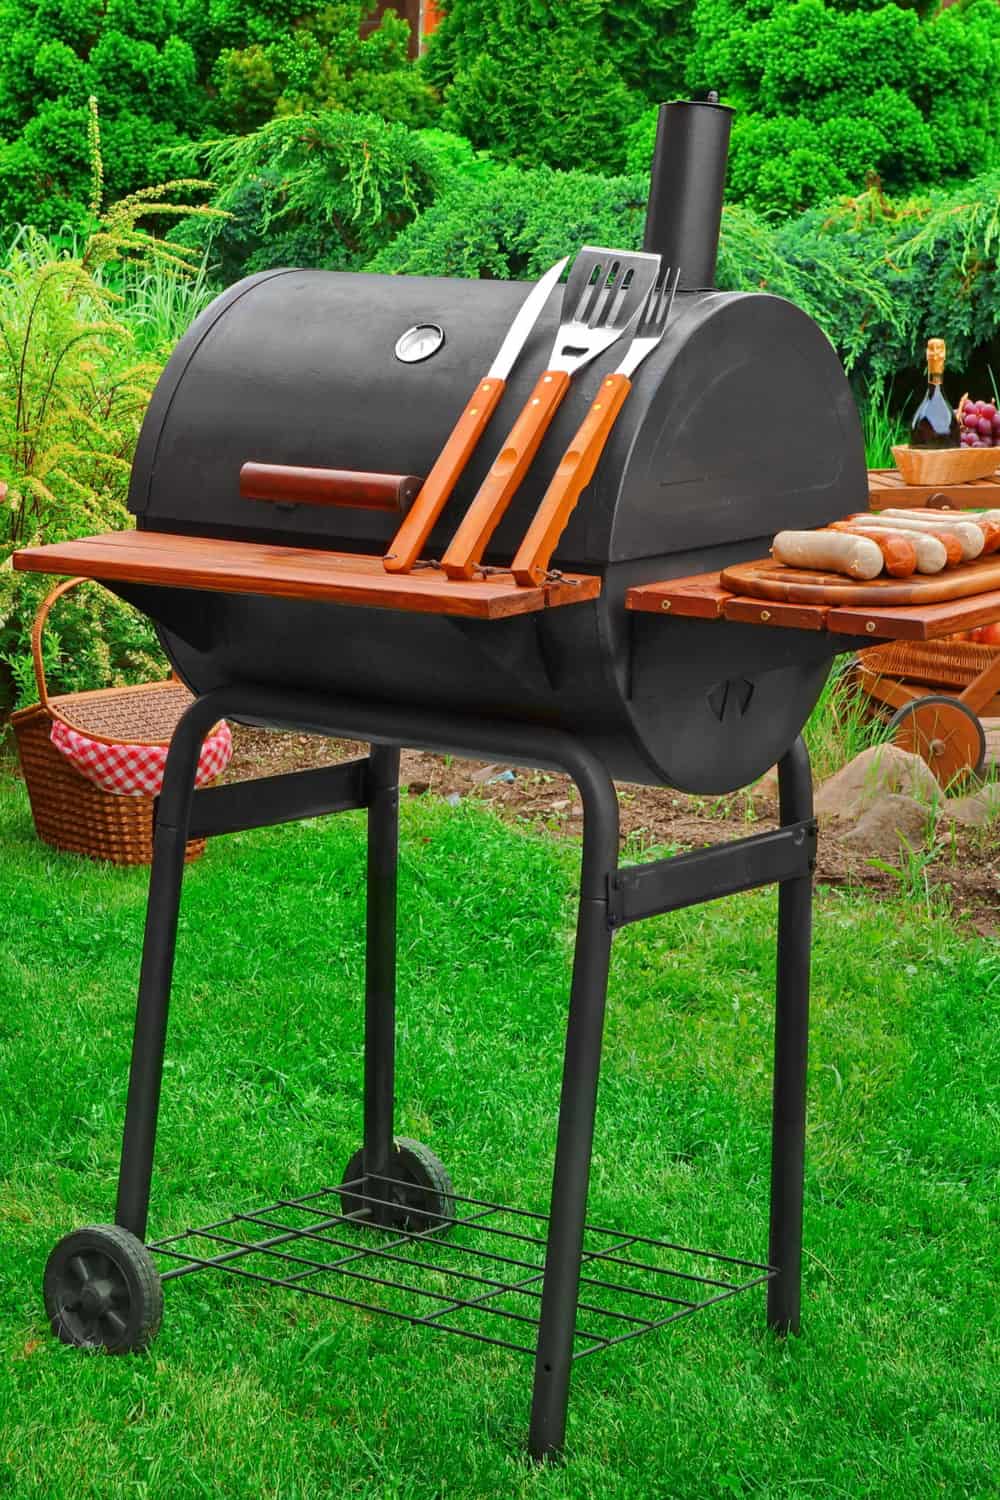 15 Homemade Weber Grill Cart Plans You Can DIY Easily